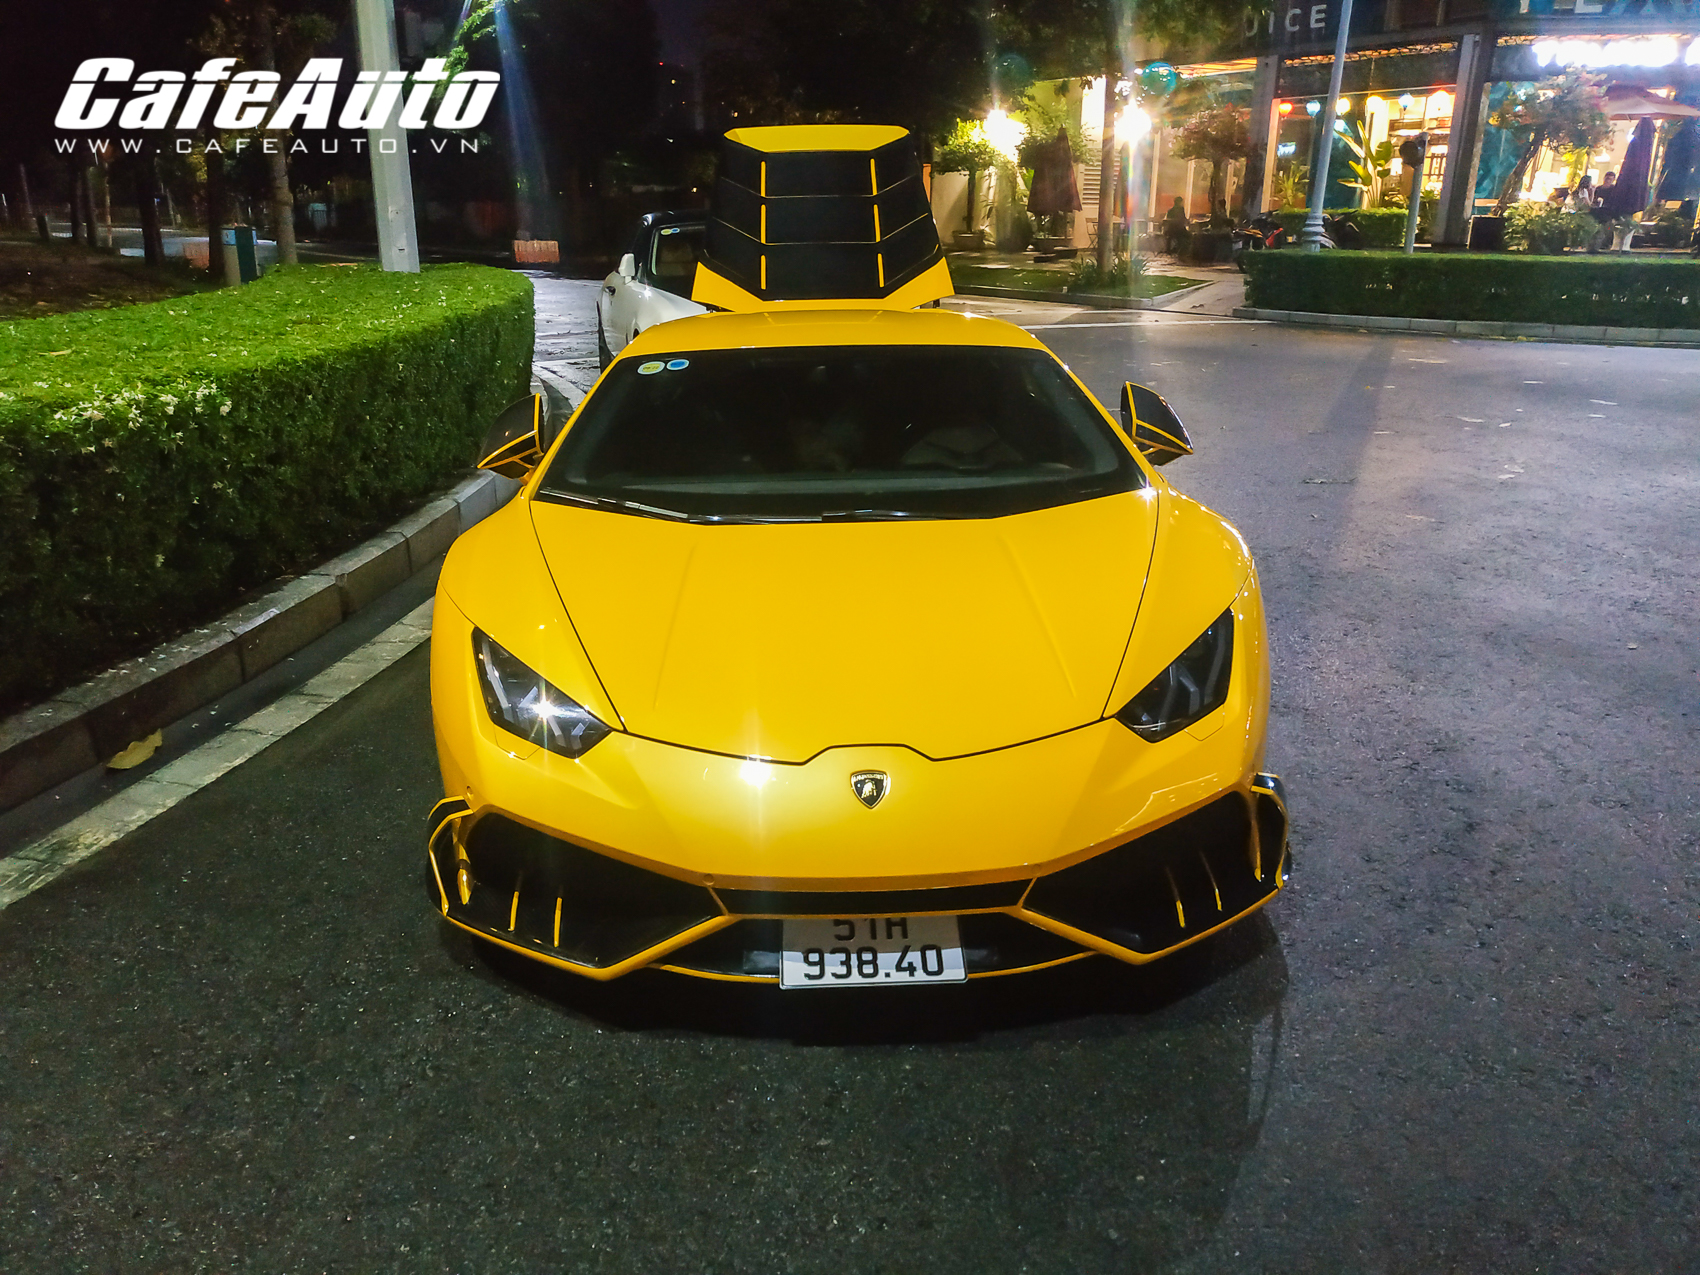 huracanmansory-cafeautovn-19